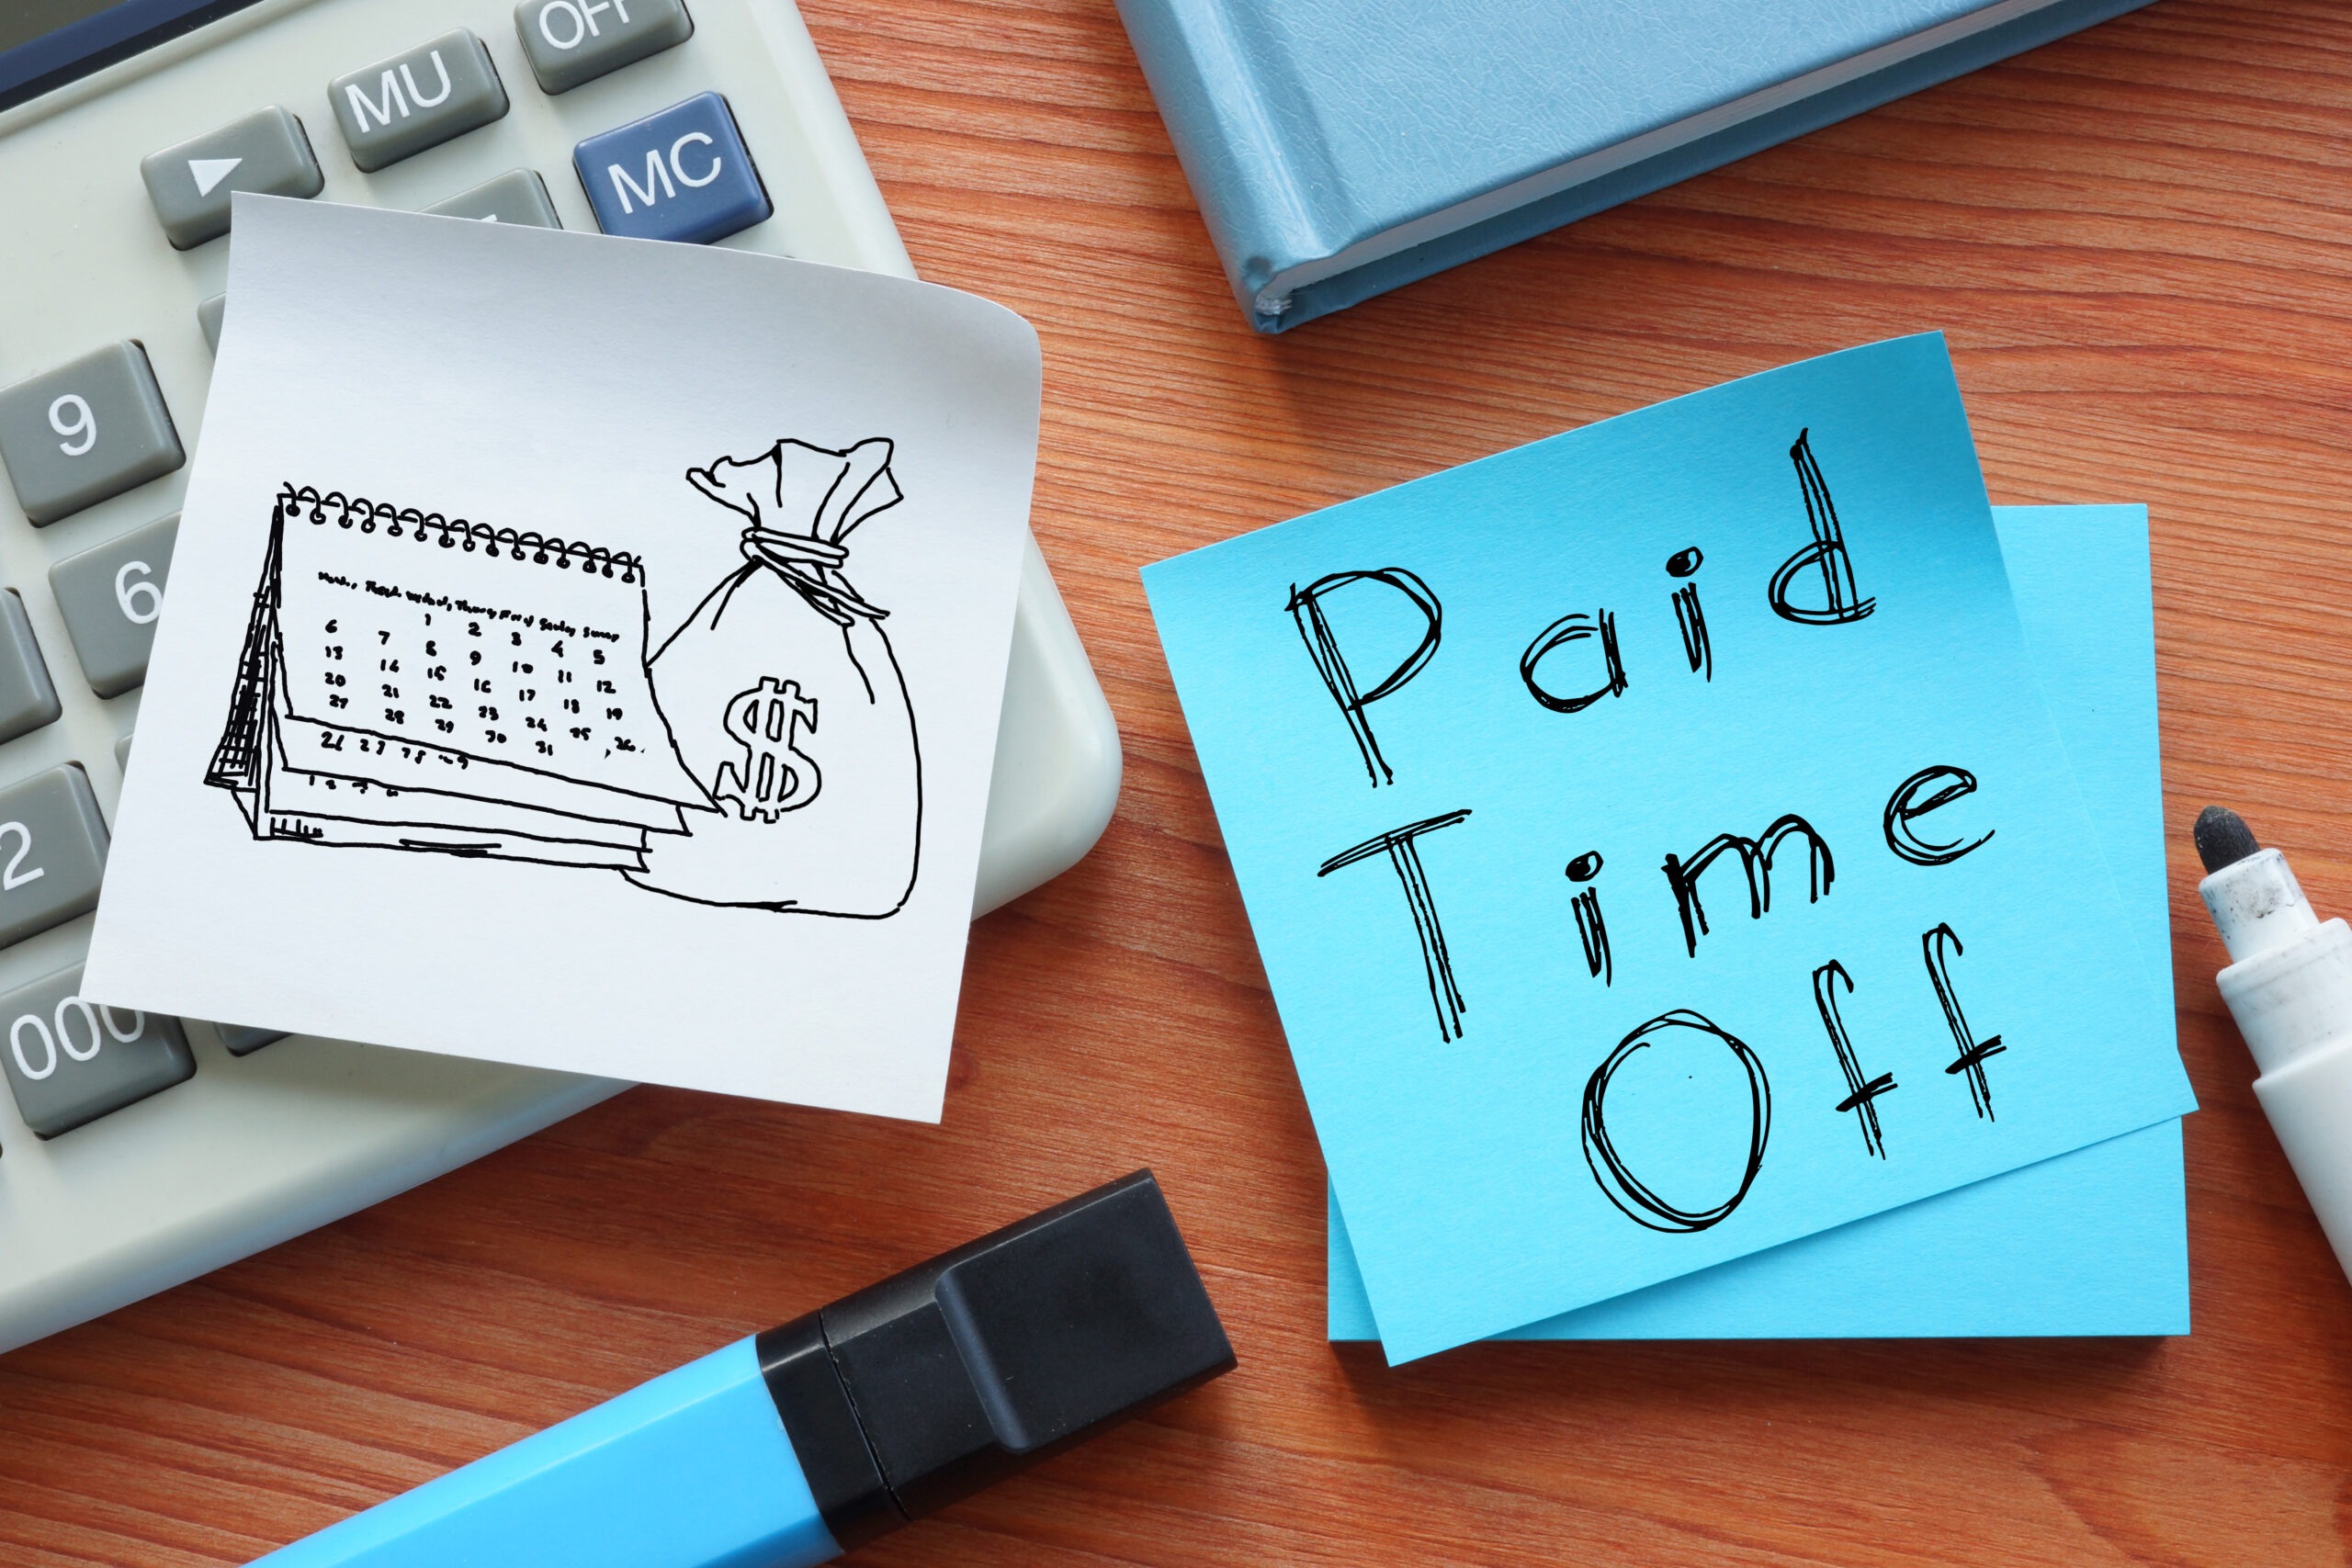 Paid Time Off is shown on the photo using the text